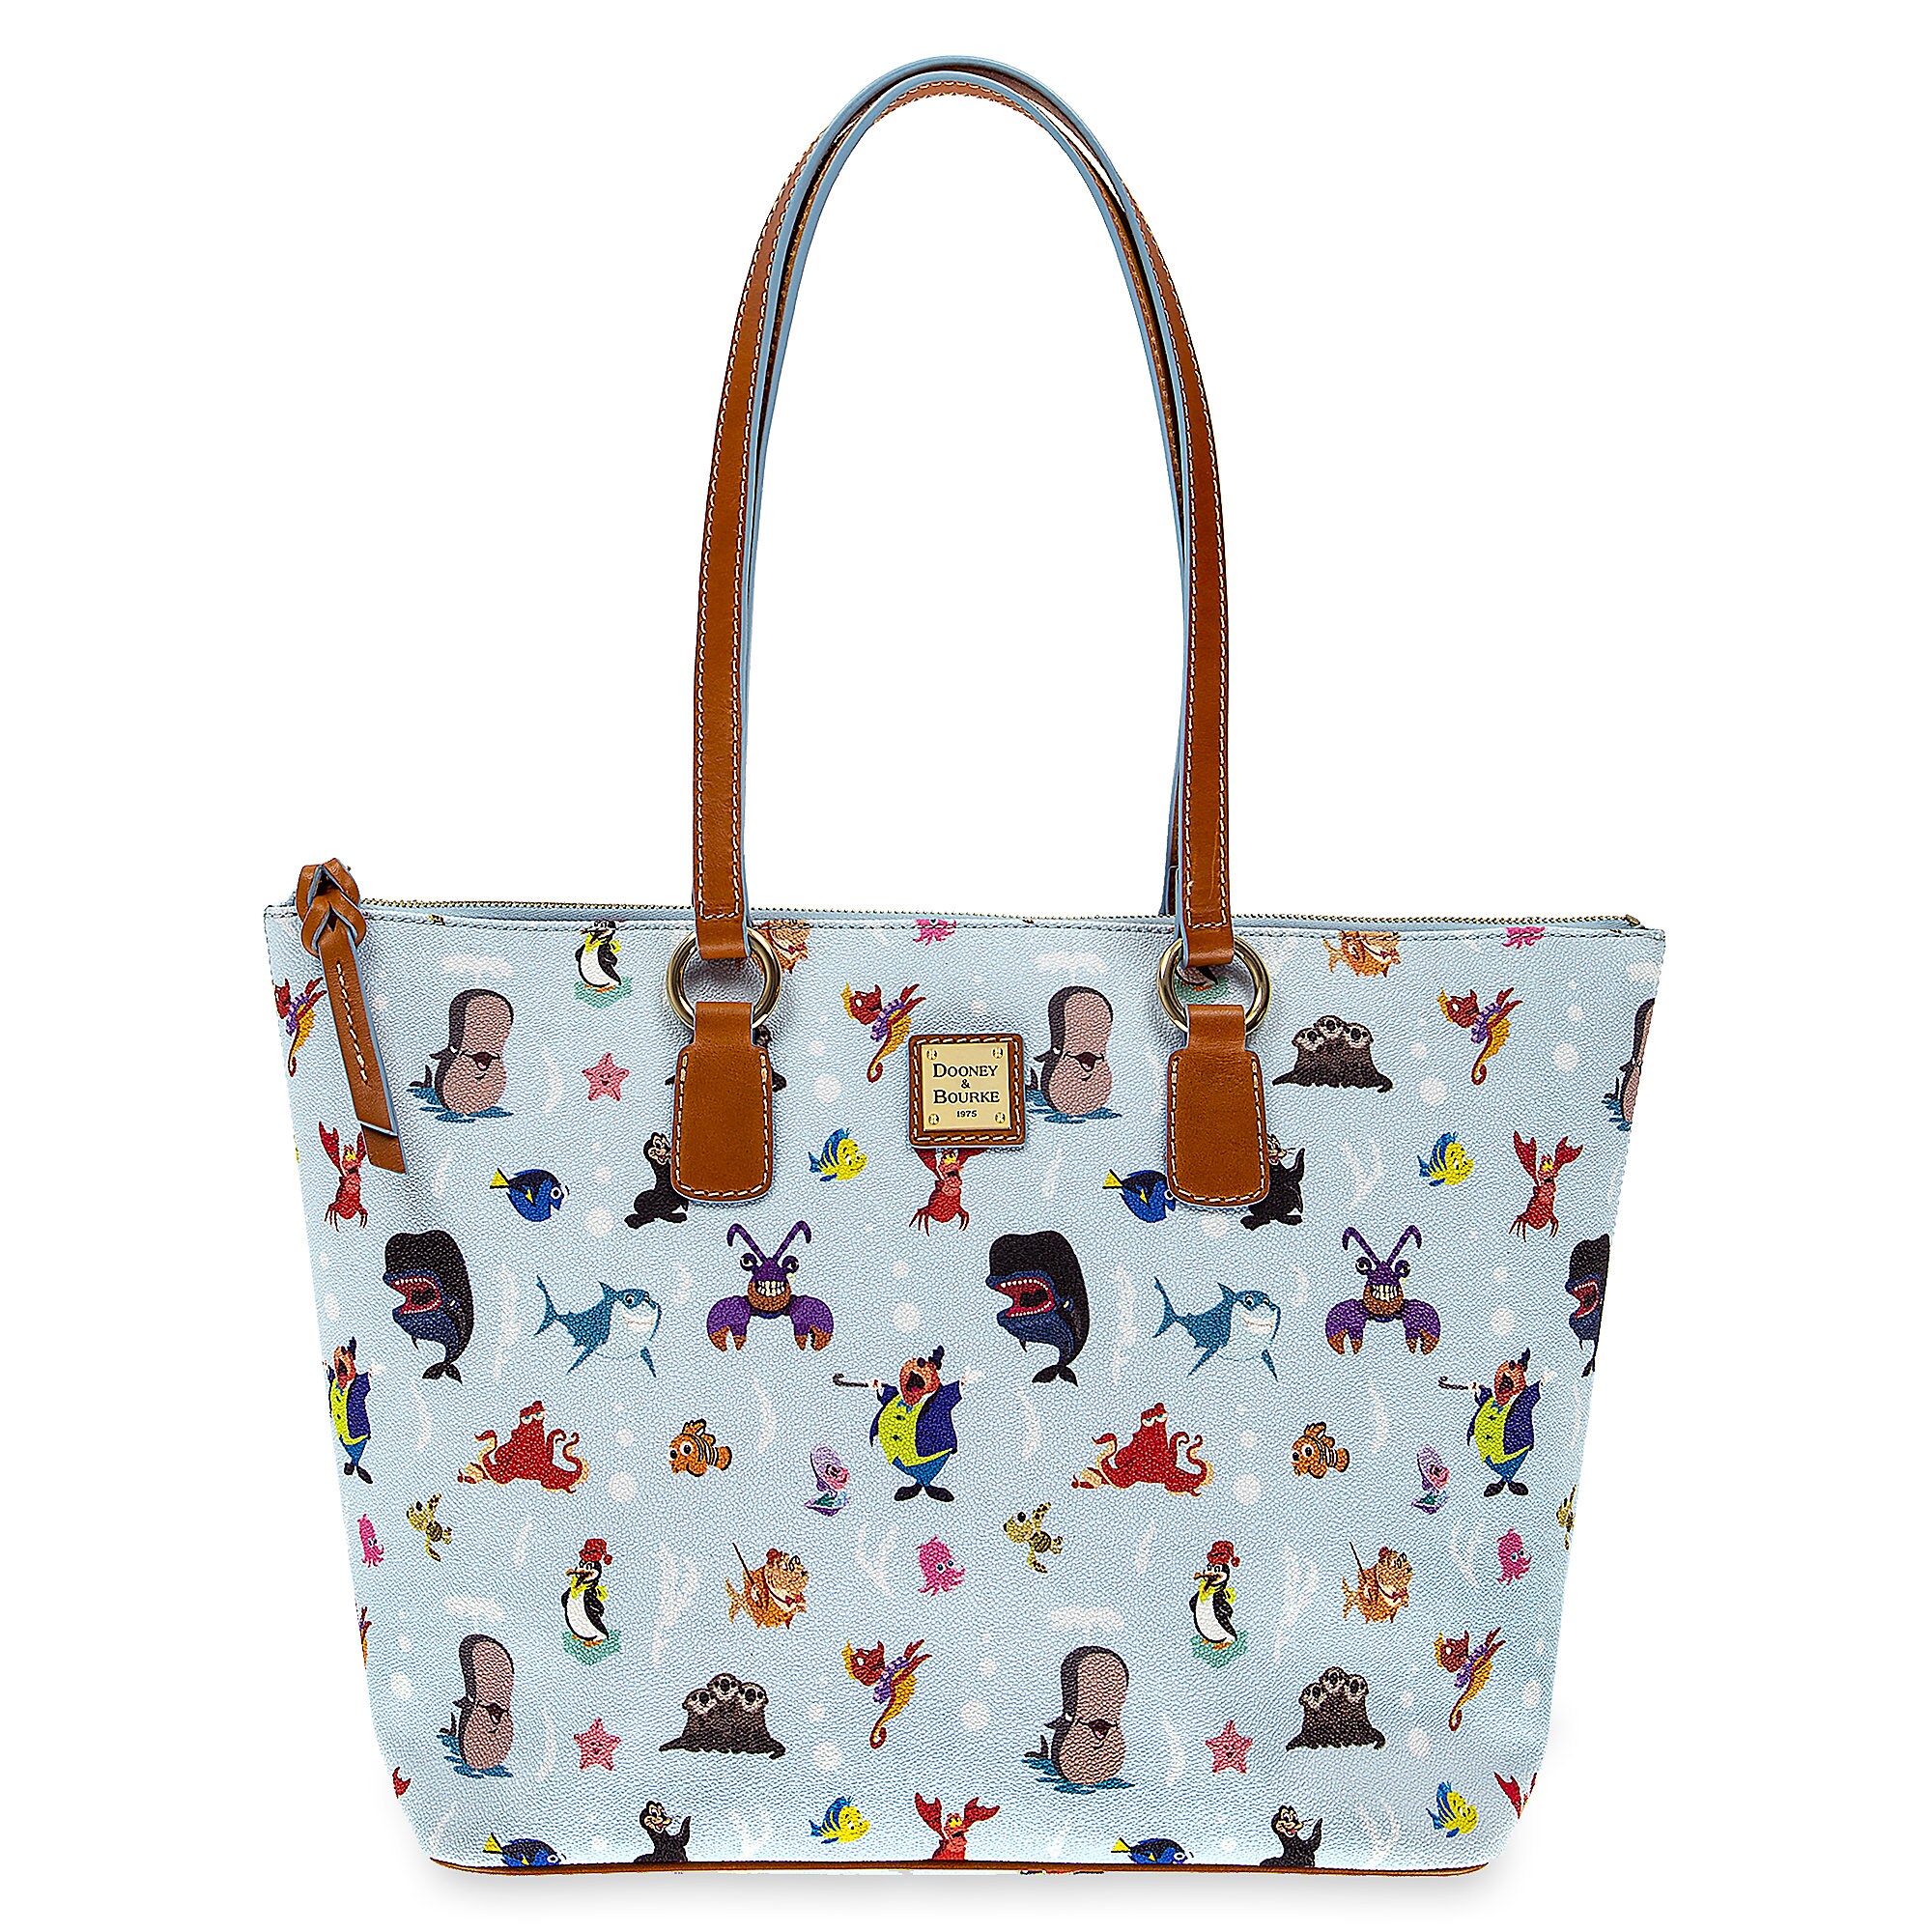 Out to Sea Tote by Dooney & Bourke